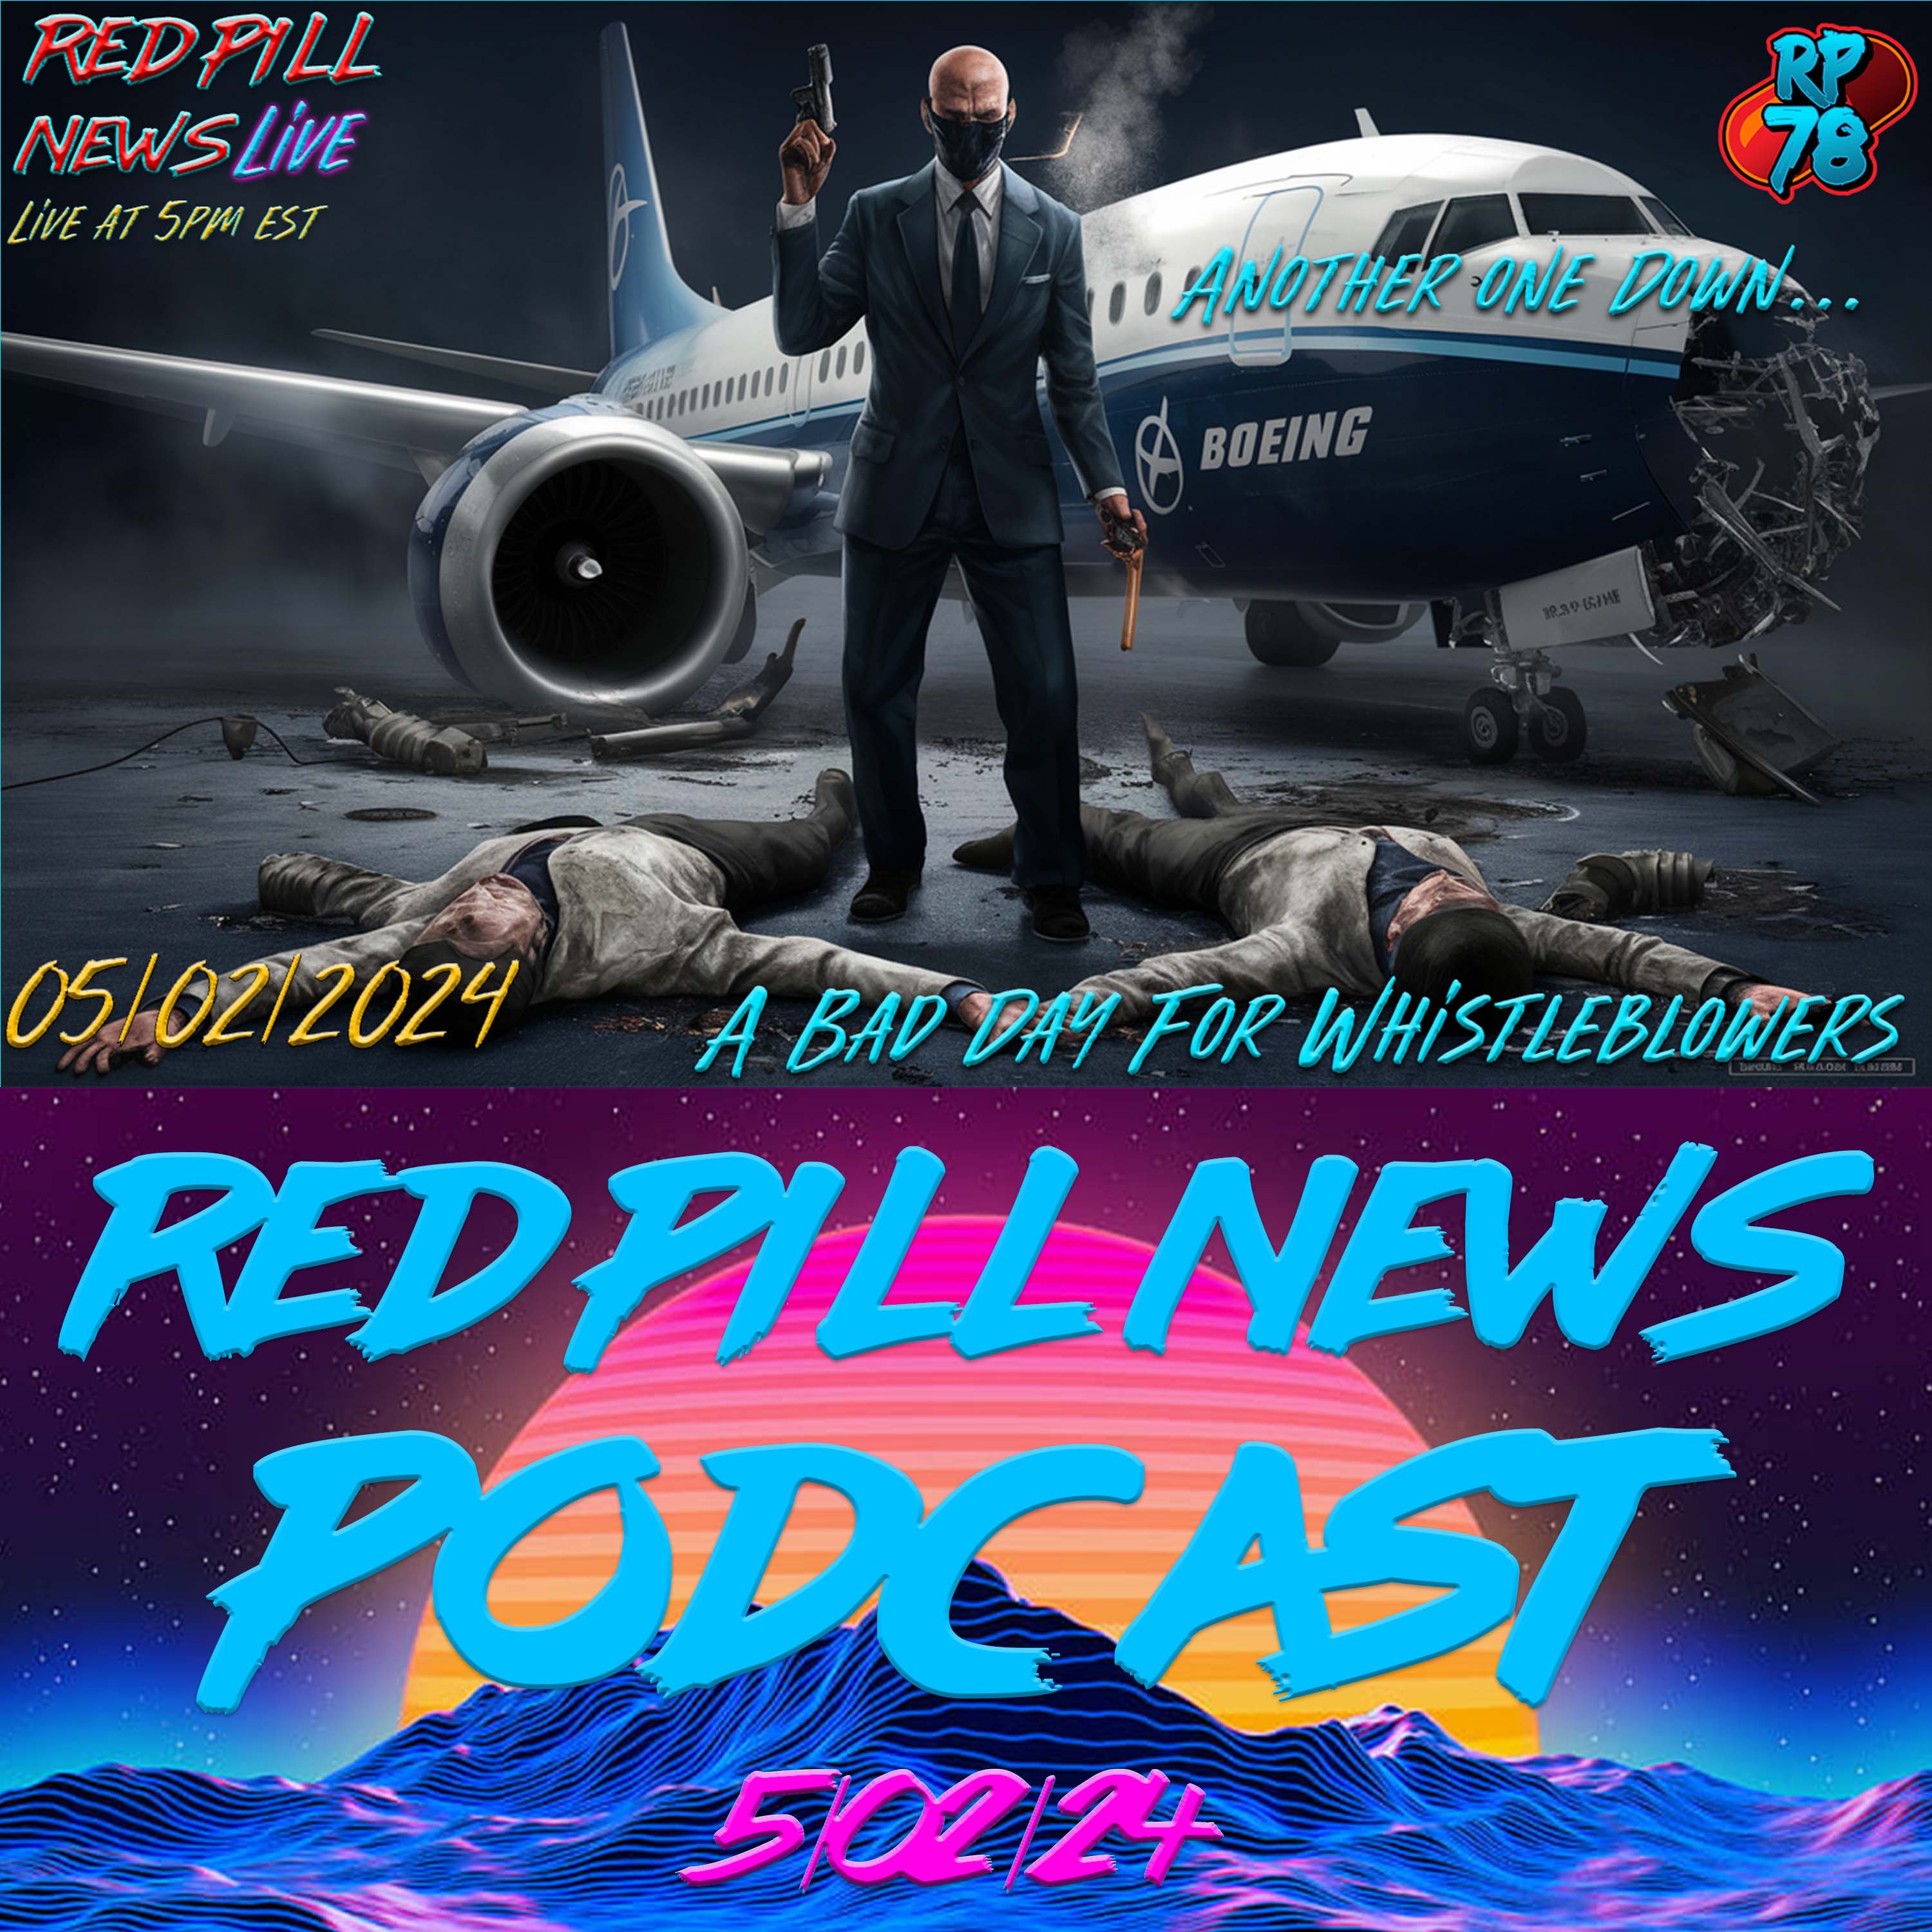 Bad Day To Be a Boeing Whistleblower on Red Pill News Live